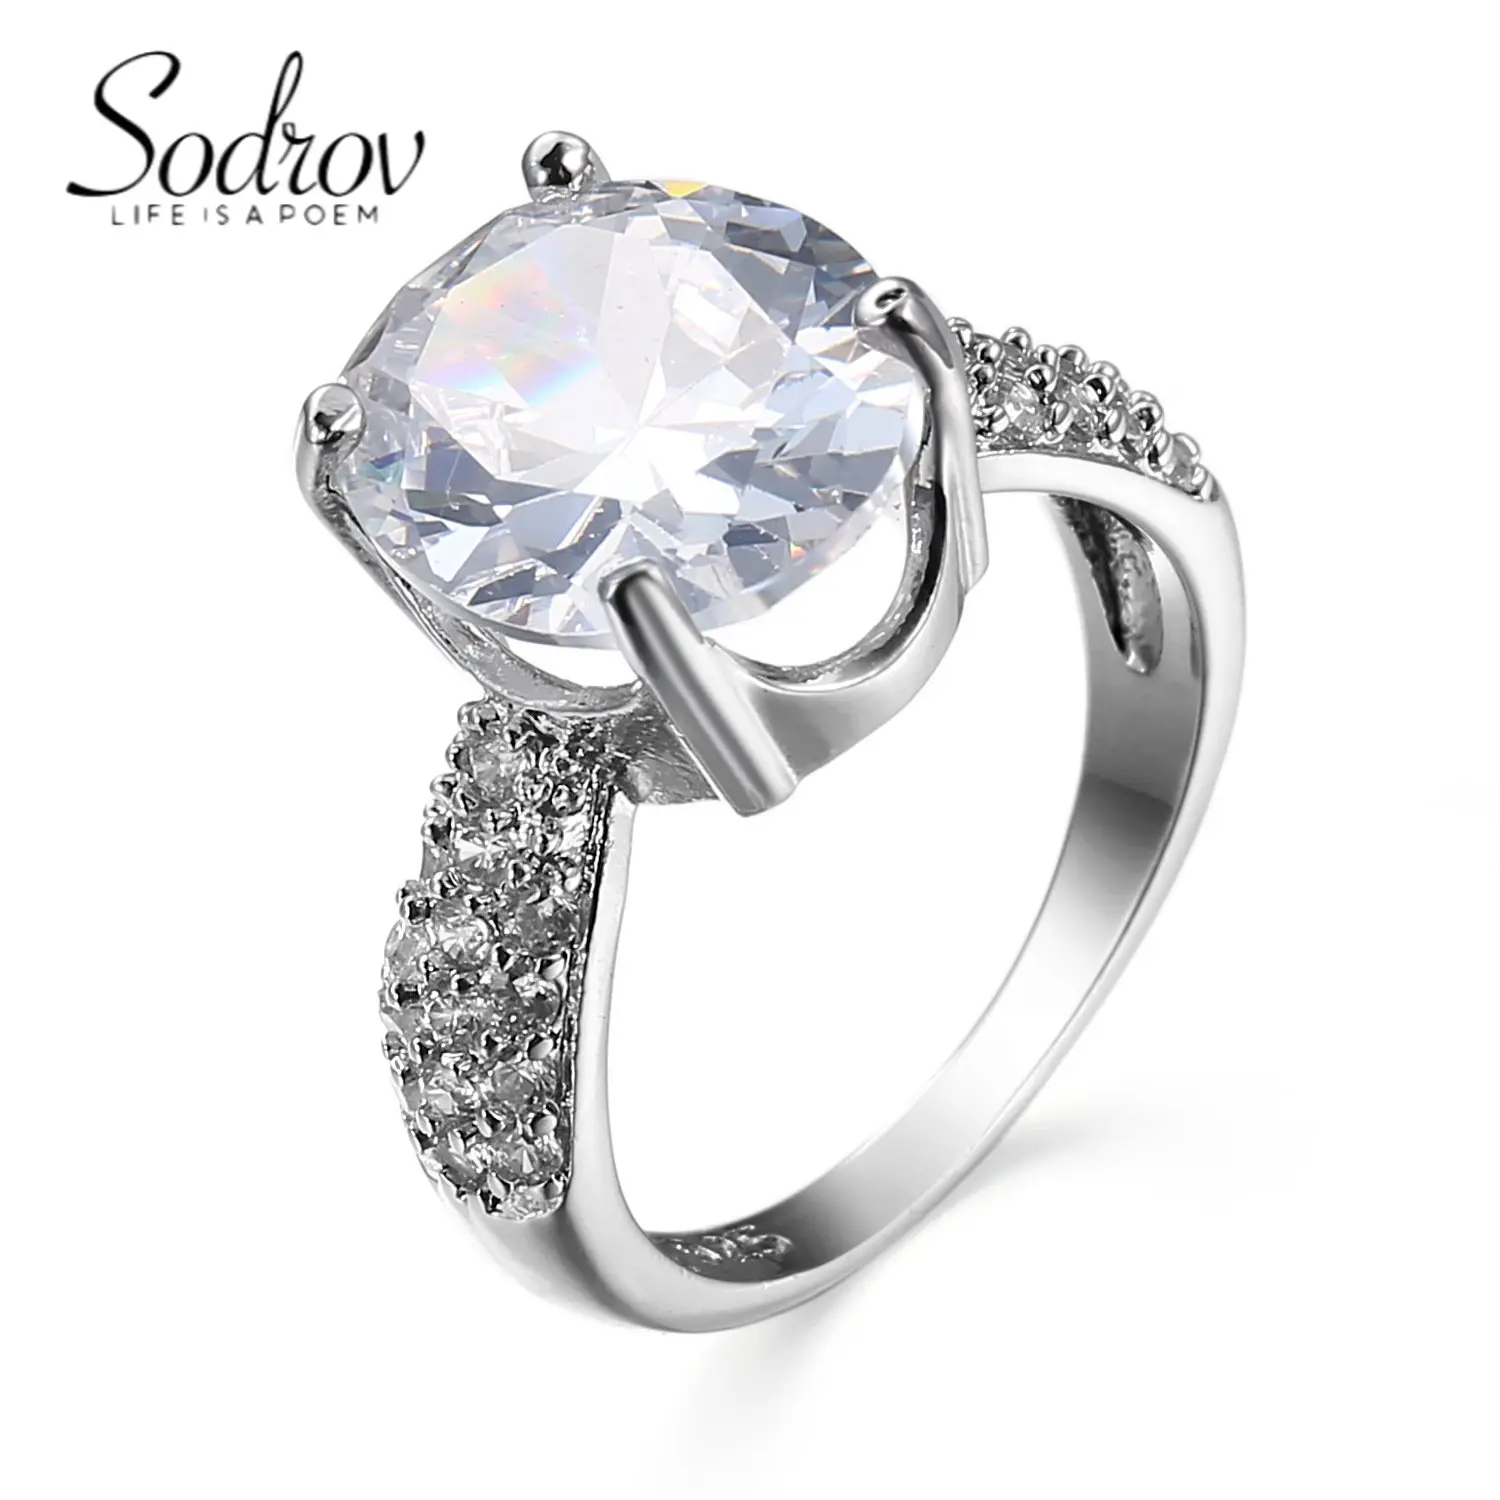 

SODROV Classic Plating Platinum Jewelry Wedding Engagement Oval Zircon Rings for Women Festival Gift